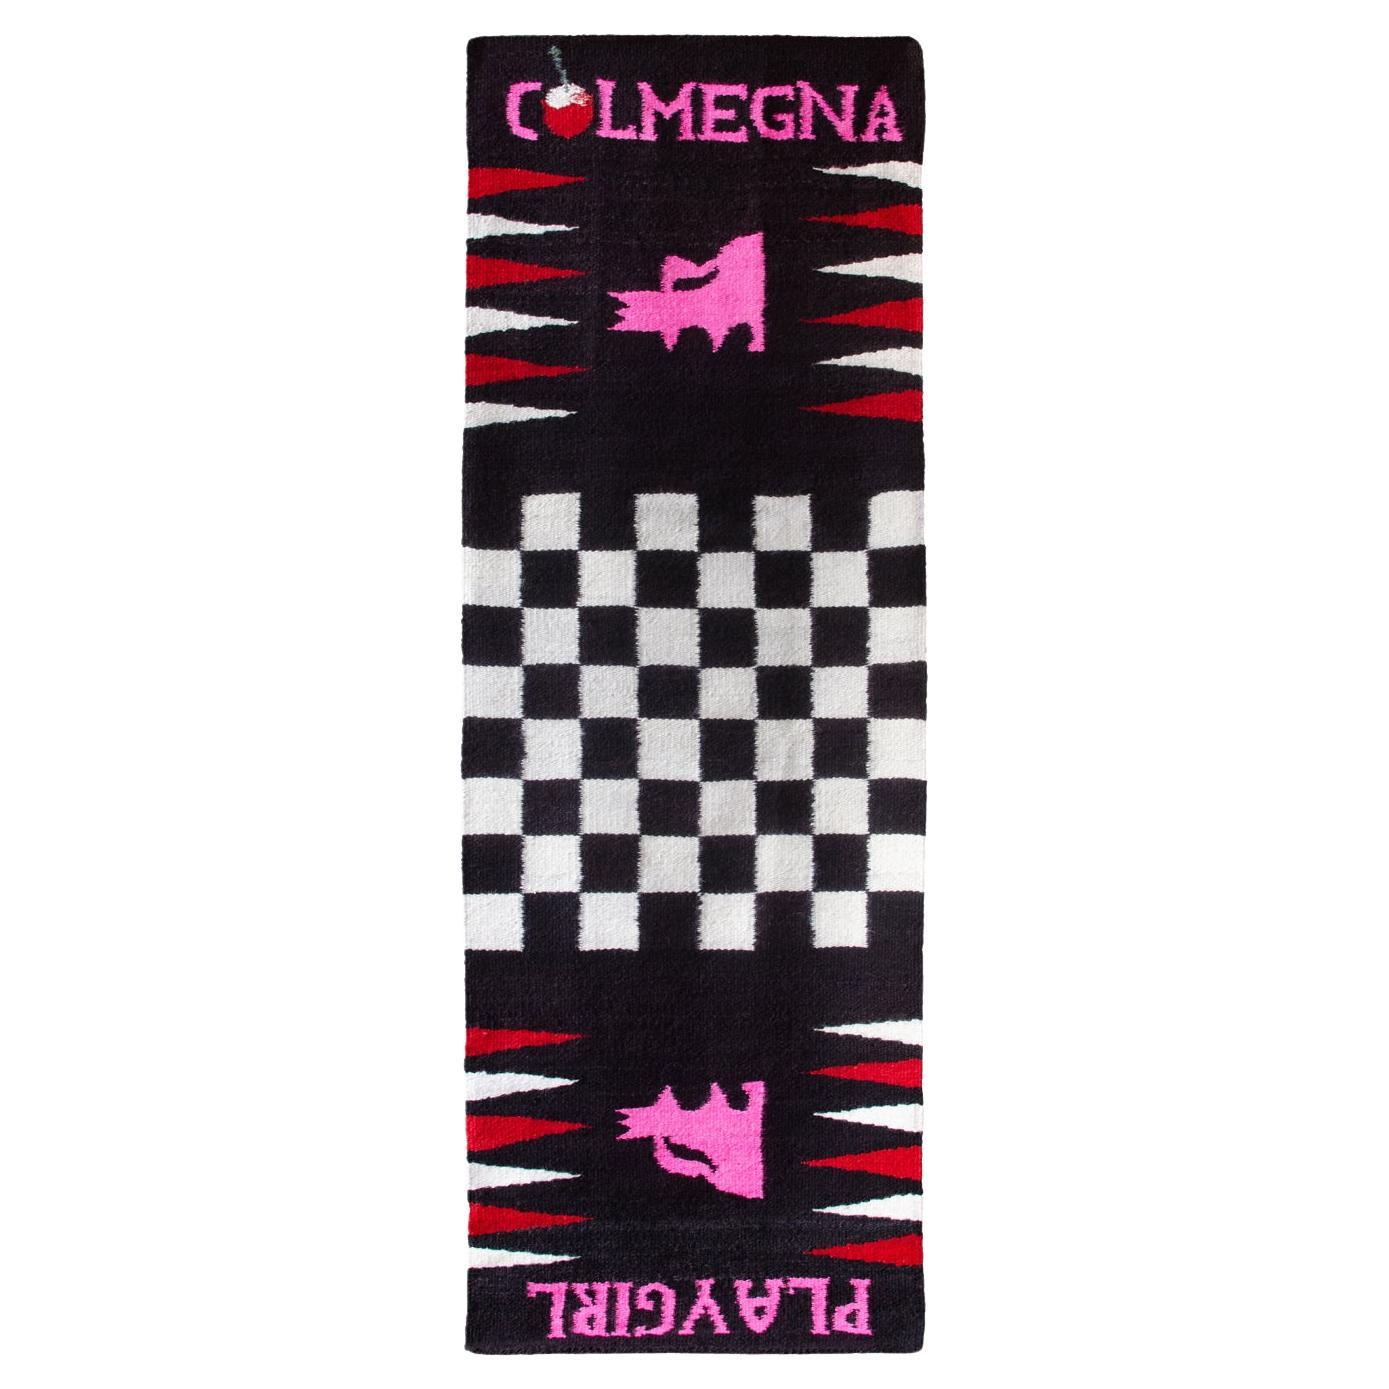 Hand-woven wool rug "Lady Colmegna Chess Rug" by Victoria Colmegna For Sale